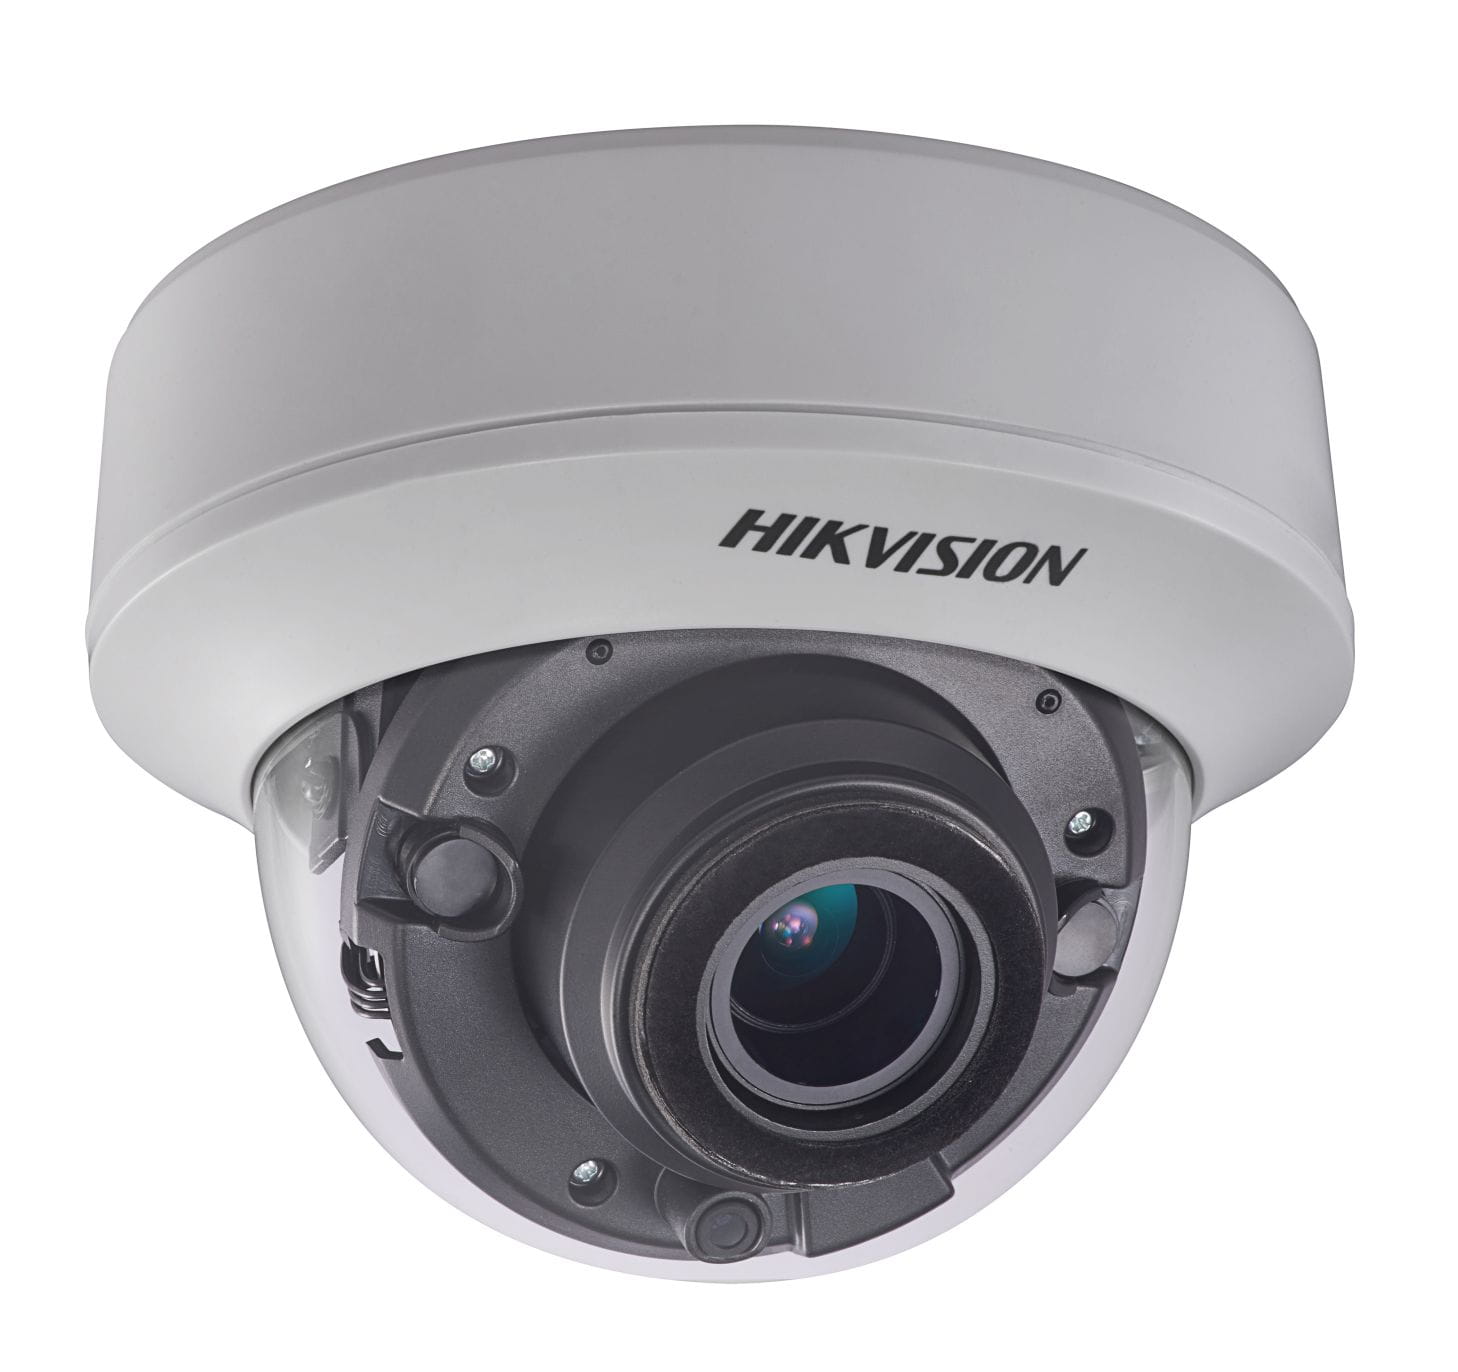 Kamera DS-2CE56H8T-AITZF 2.7-13.5mm 5mp IR 60m HD Dome Camera HIKVISION